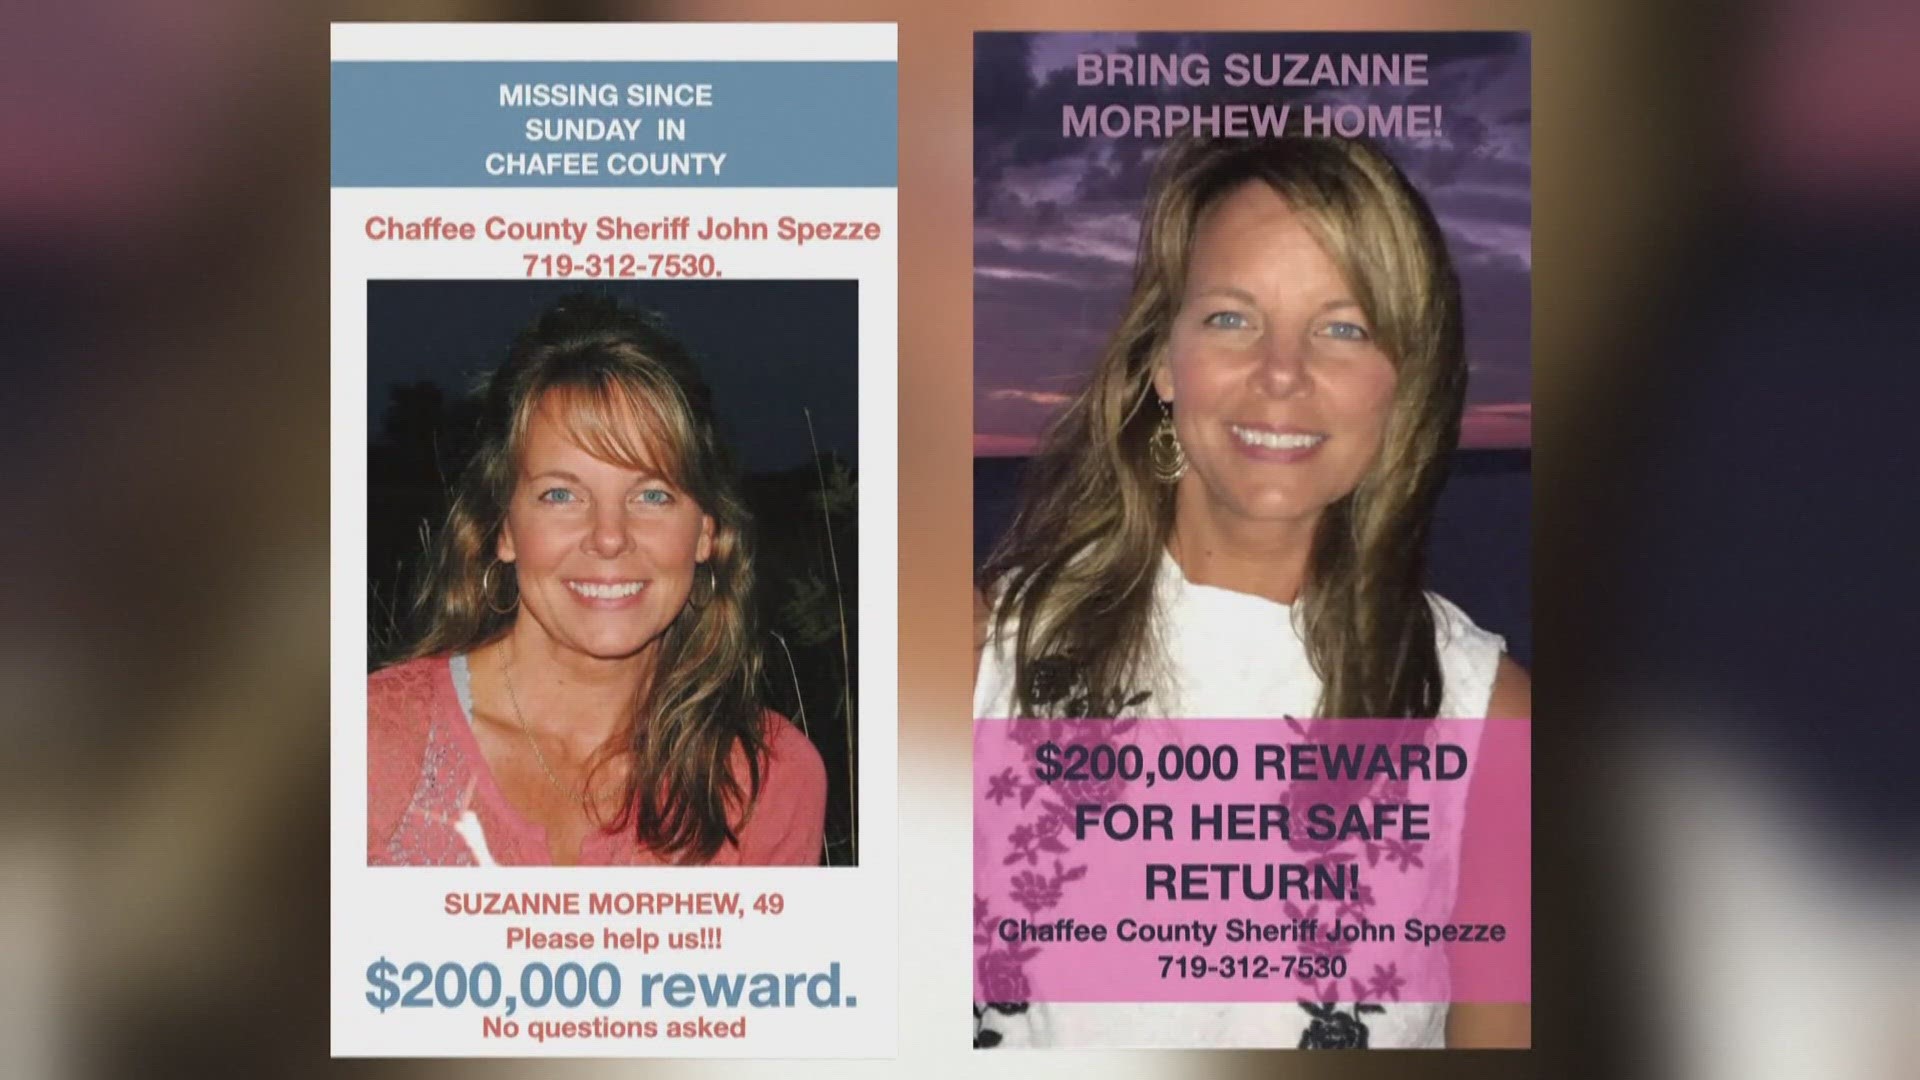 Morphew, a 49-year-old mother of two who grew up in Madison County, went missing in May 2020 from her home.